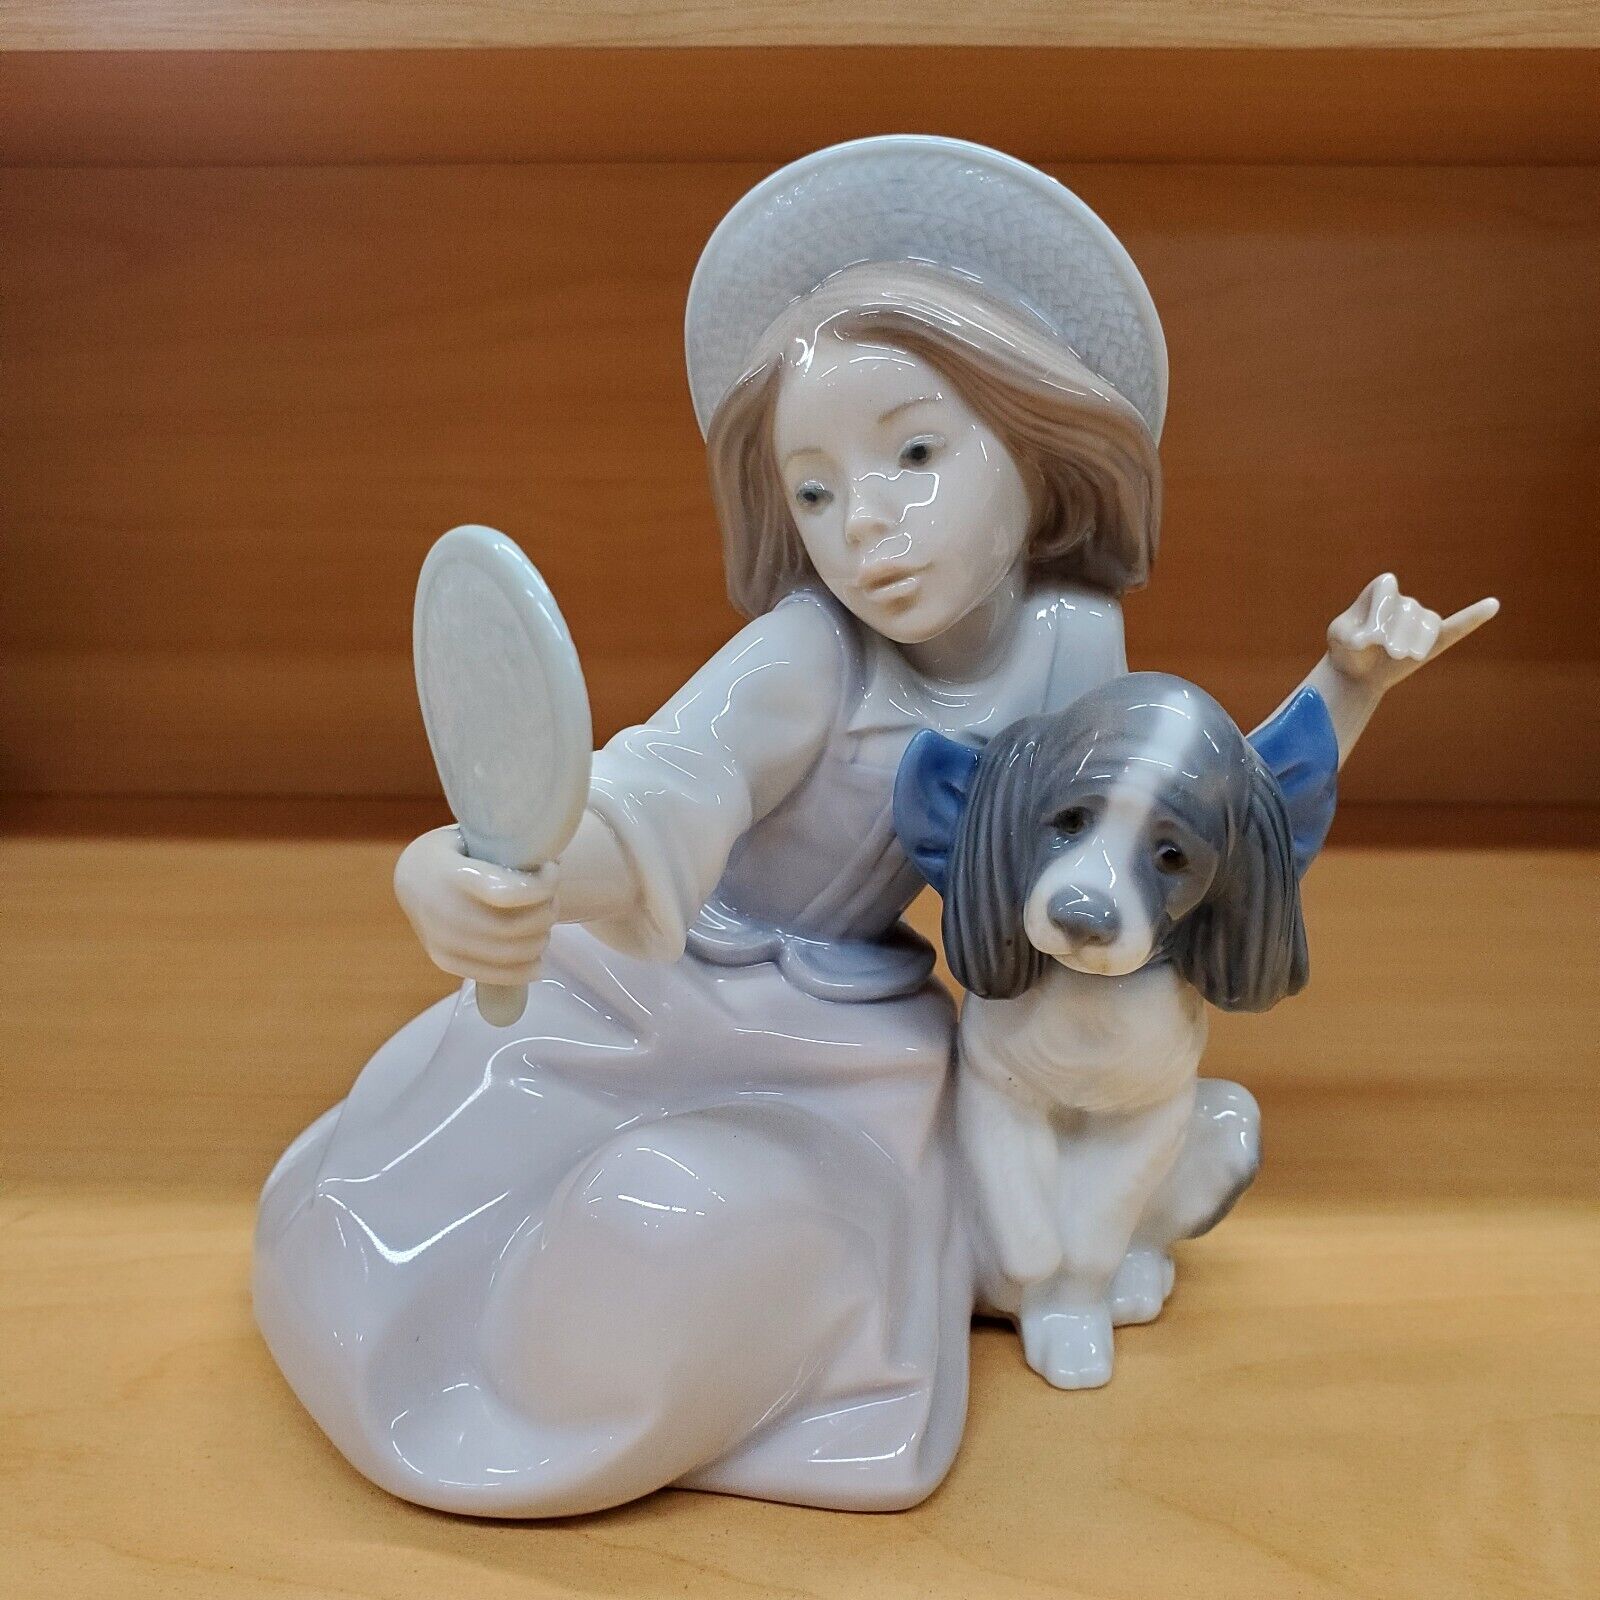 LLADRO PORCELAIN FIGURINE #5468 WHO'S THE FAIREST GIRL MIRROR DOG Glossy